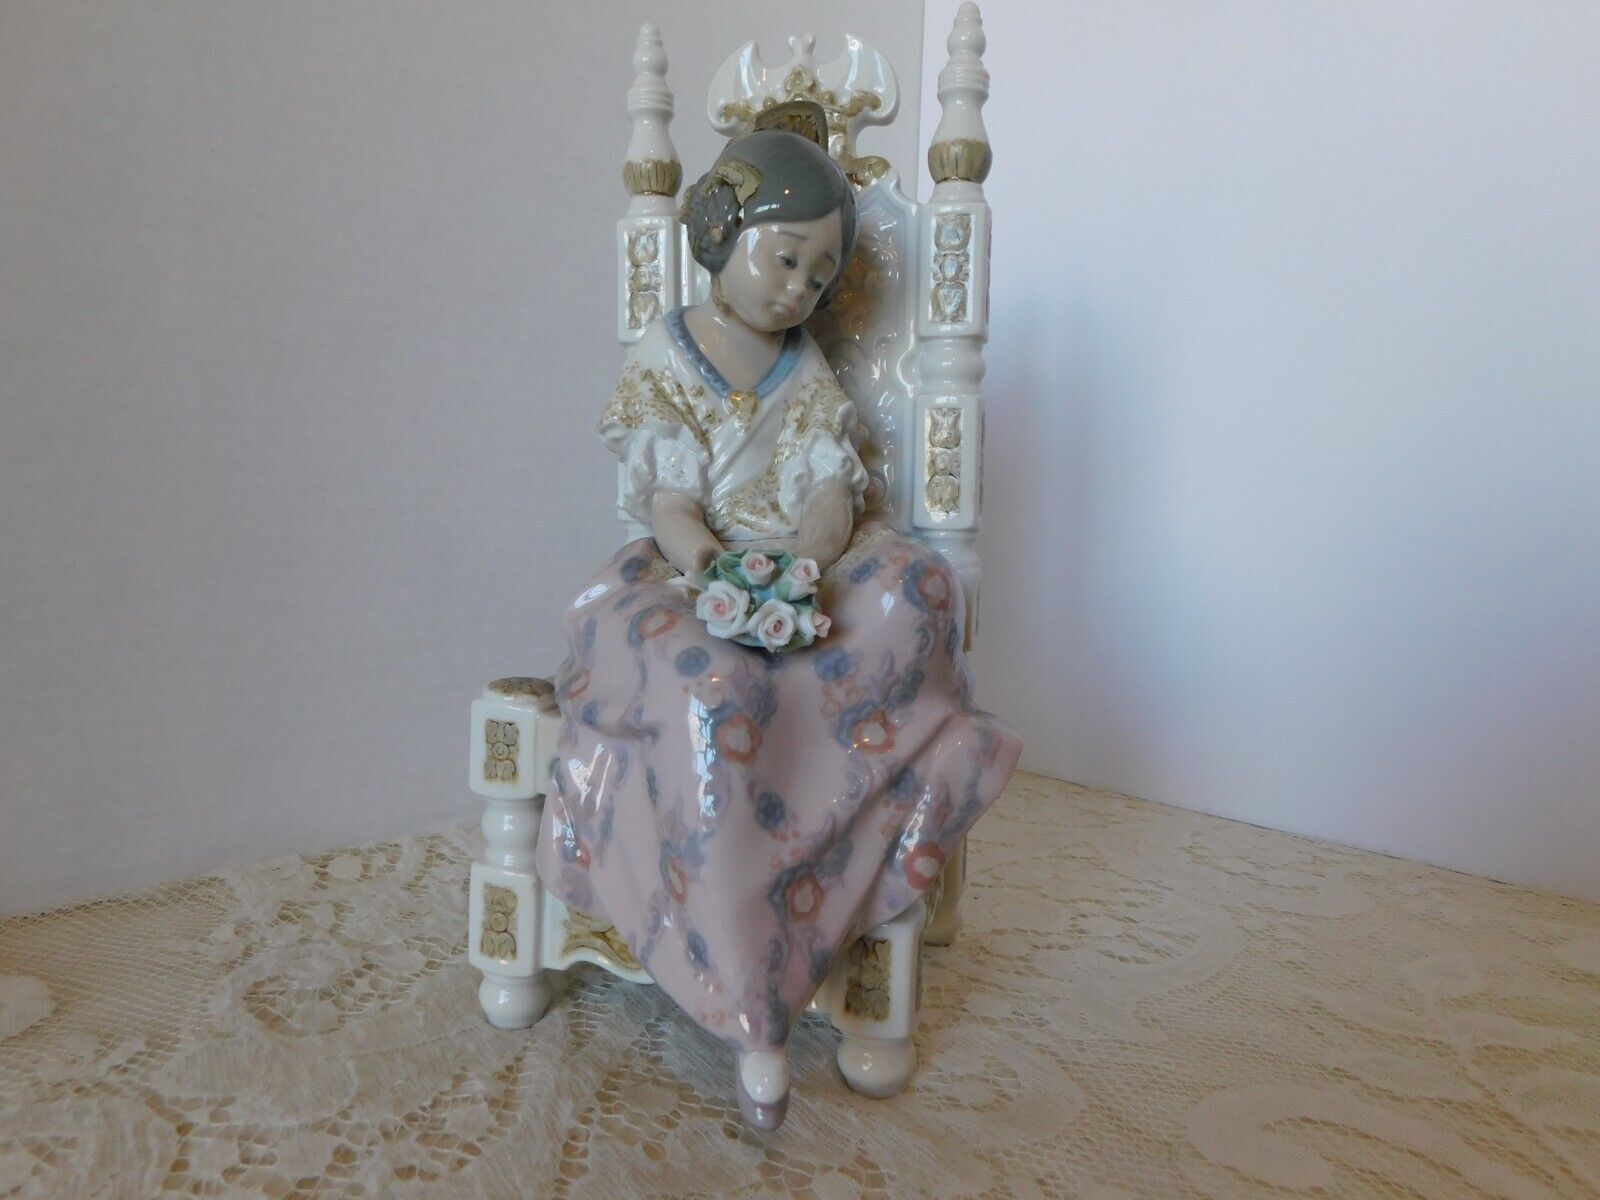 STUNNING RARE LLADRO SPAIN FIGURE #1397- SECOND THOUGHTS - TIRED VALENCIAN GIRL